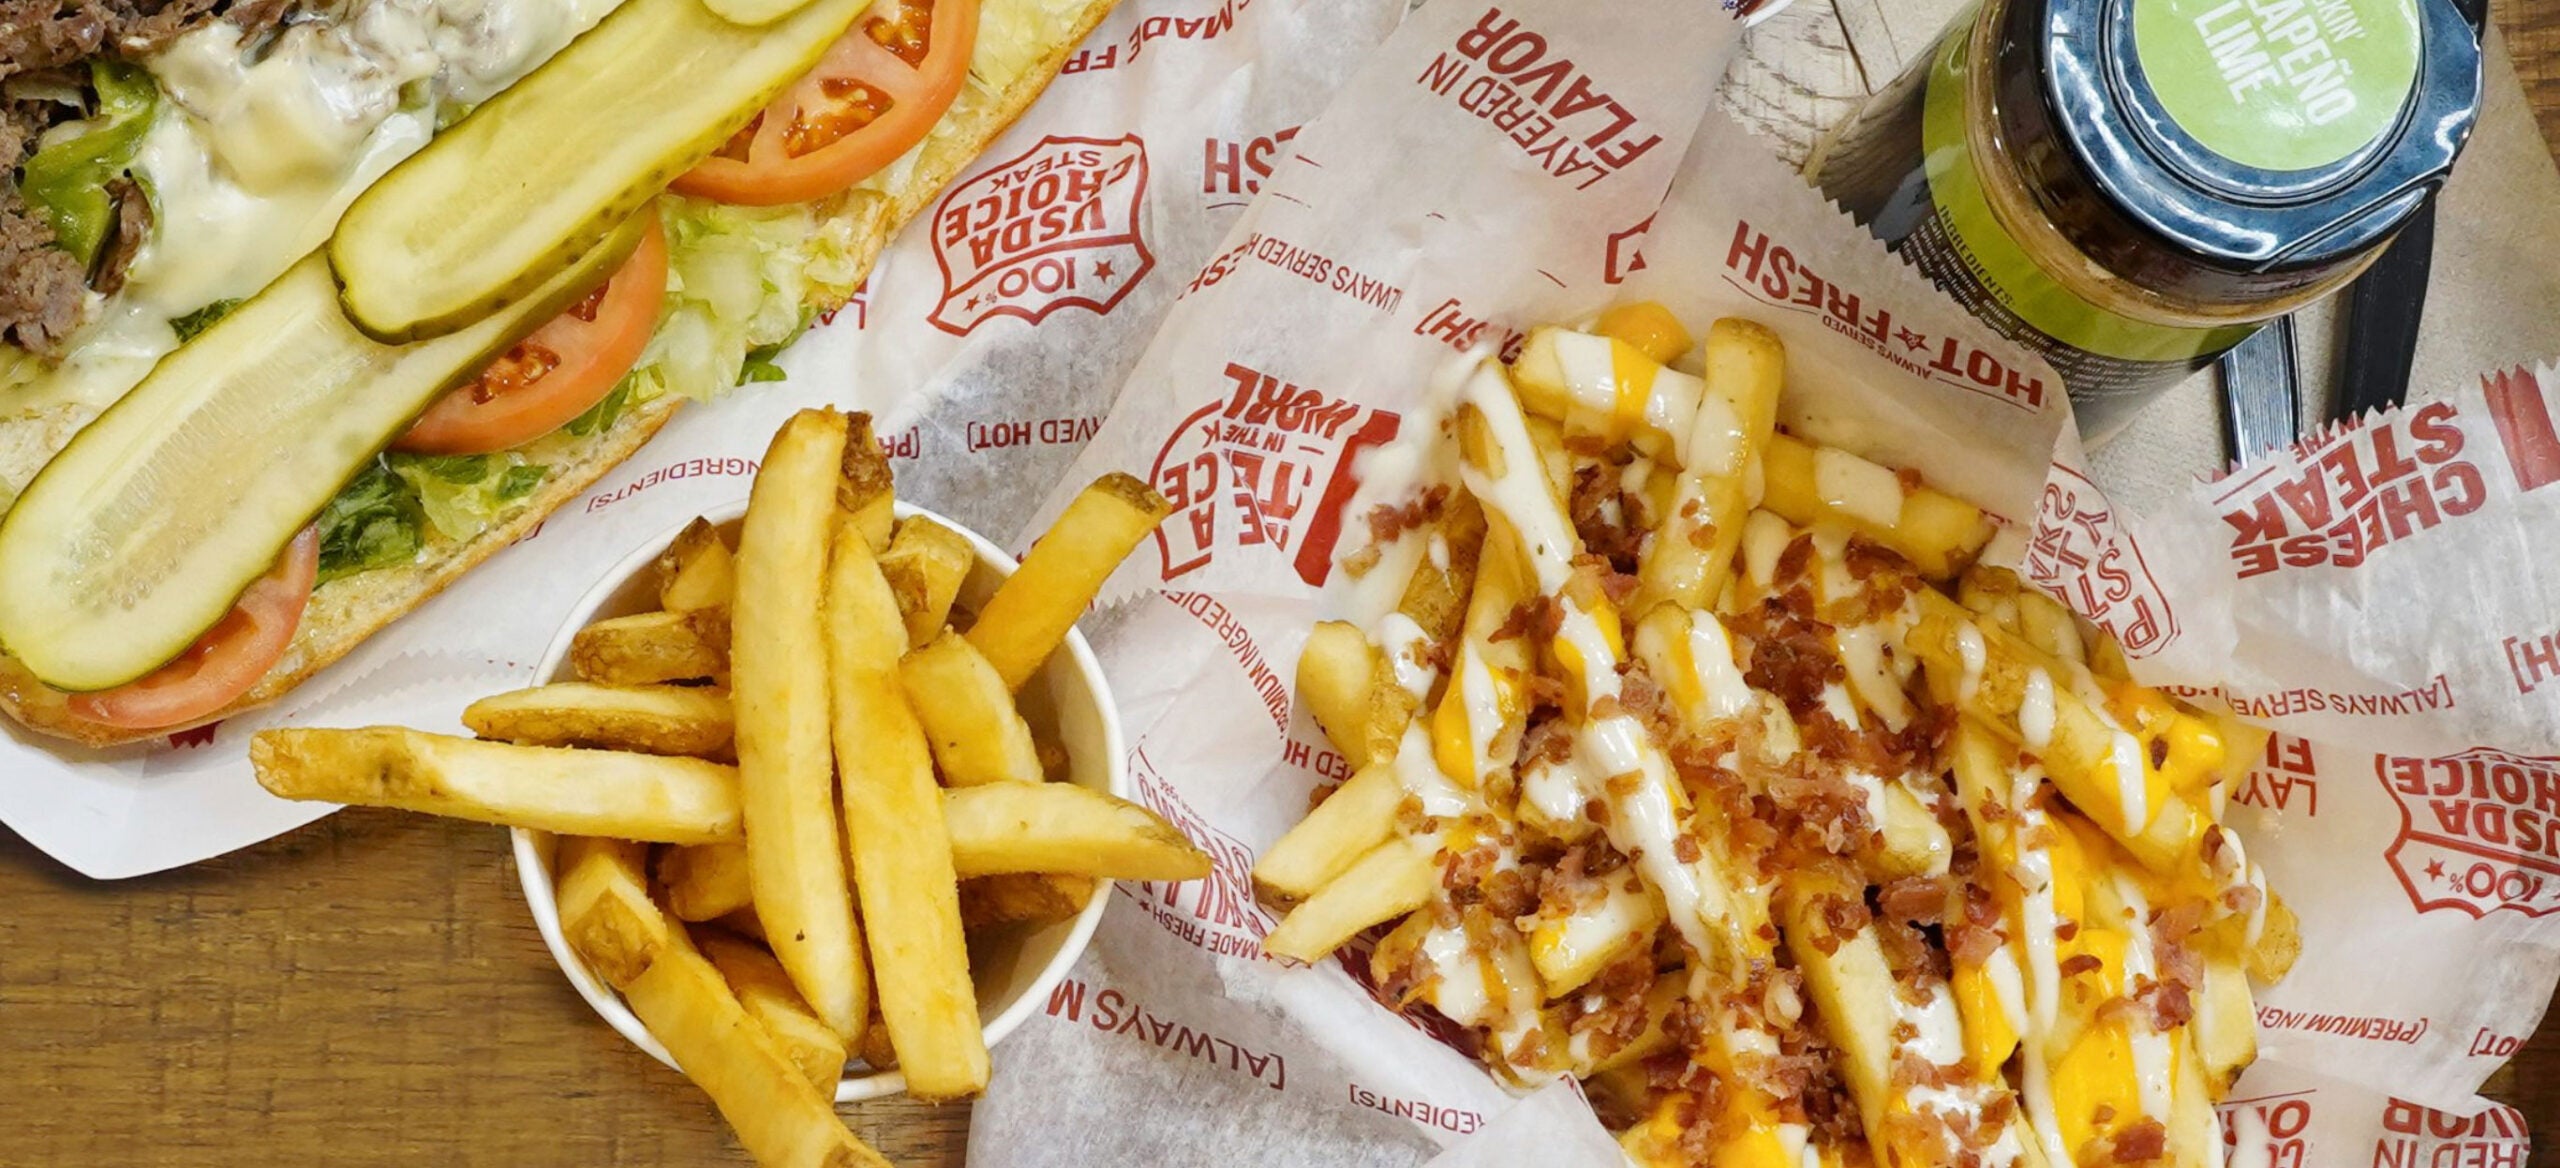 Charleys Cheesesteaks Location Details